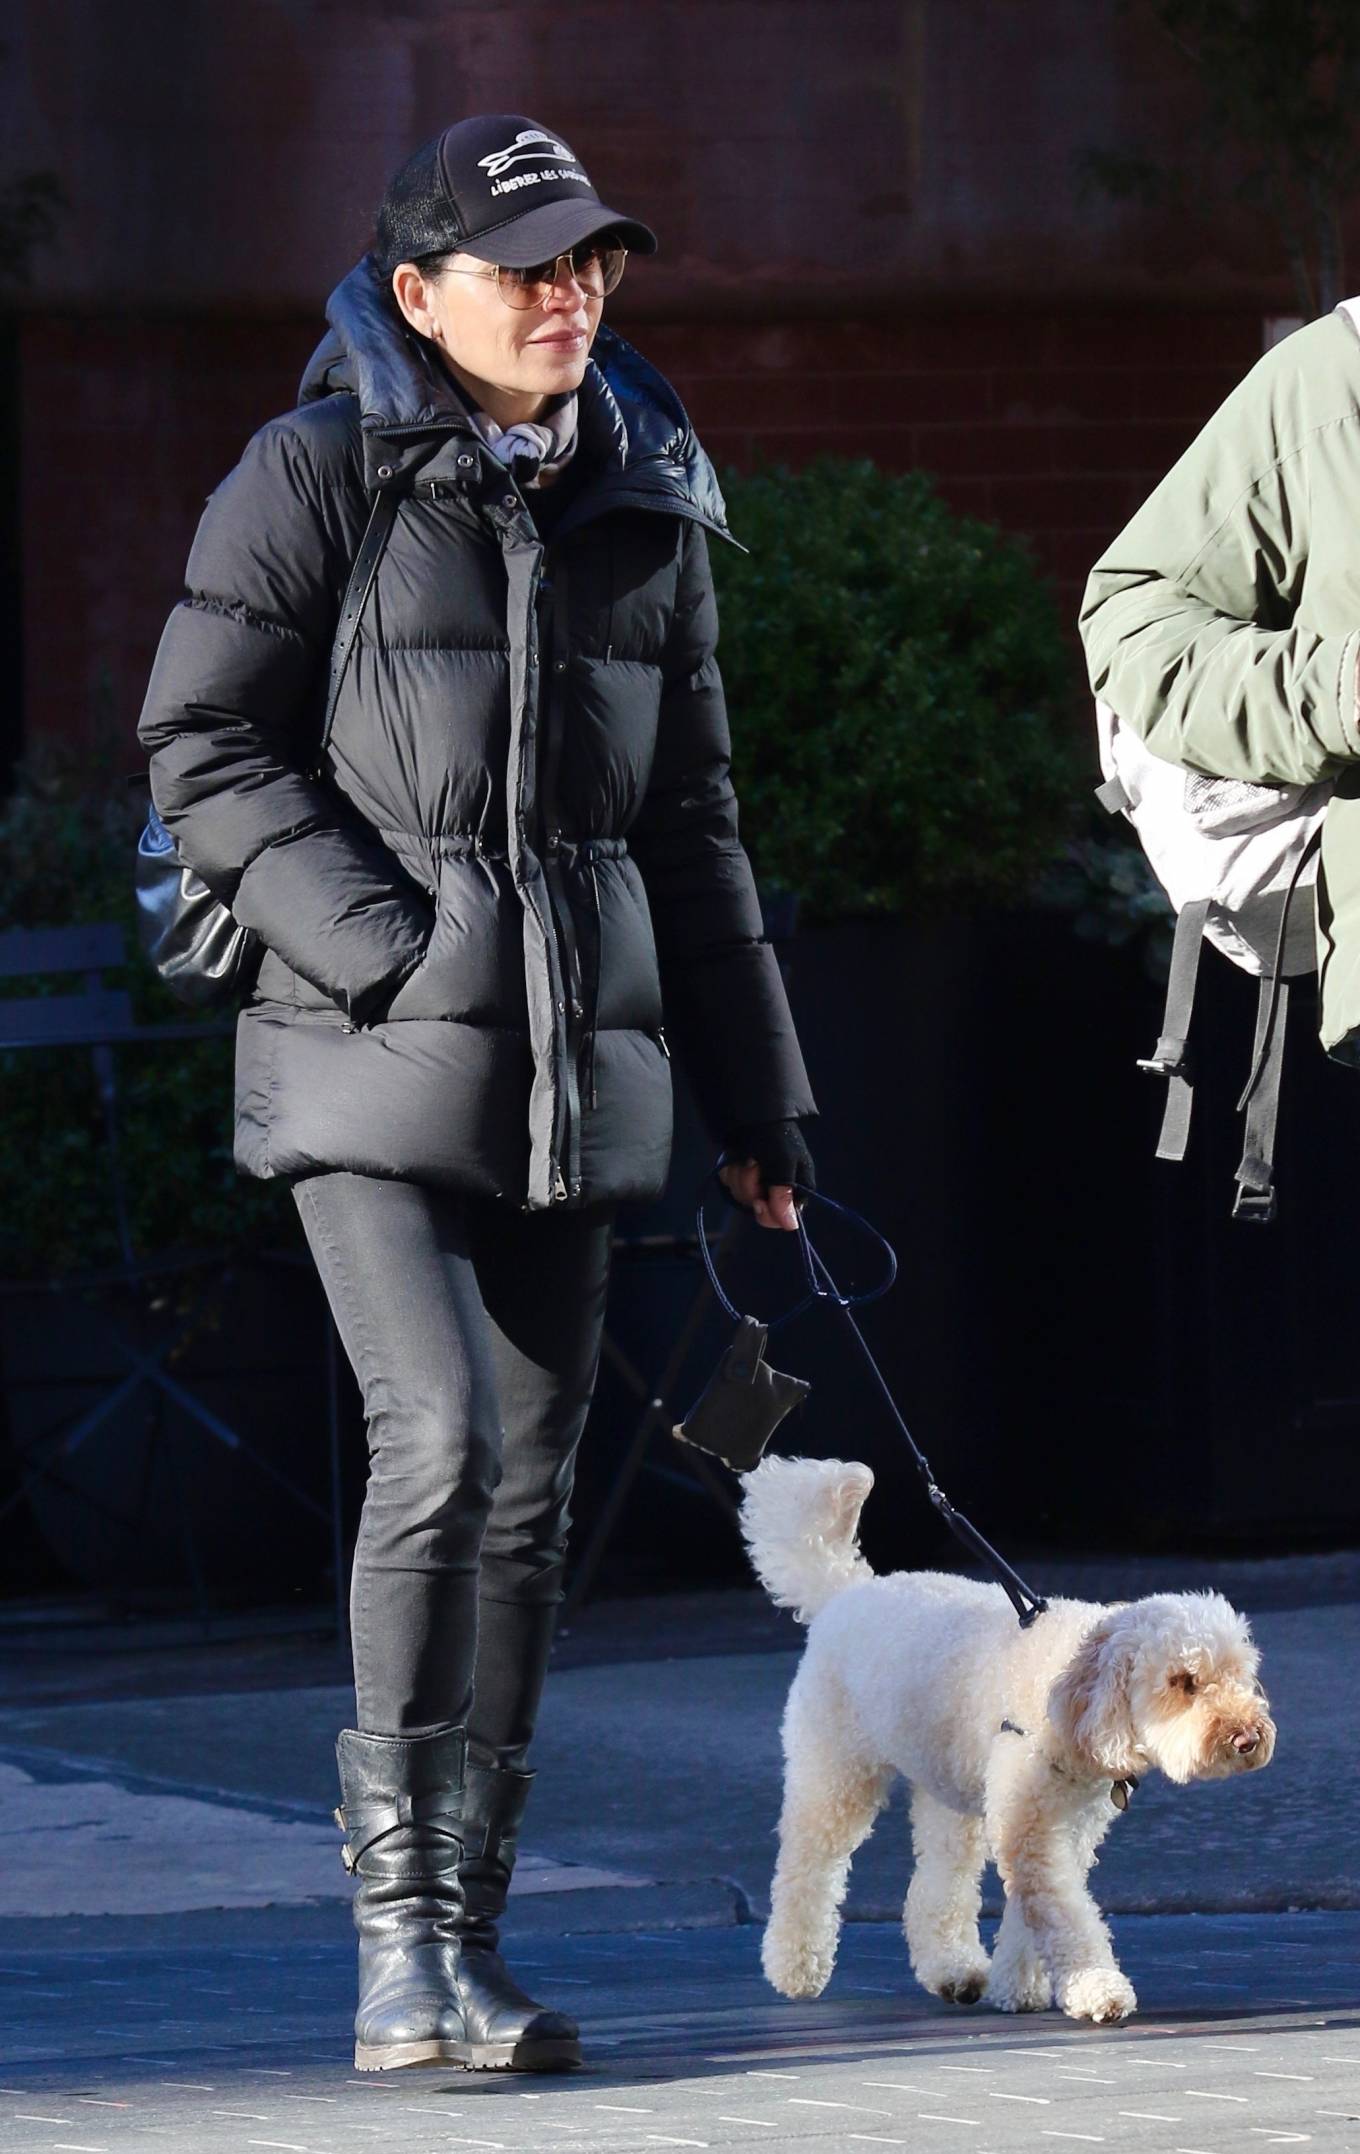 Julianna Margulies - Spotted while walking her dog in Manhattan’s SoHo area